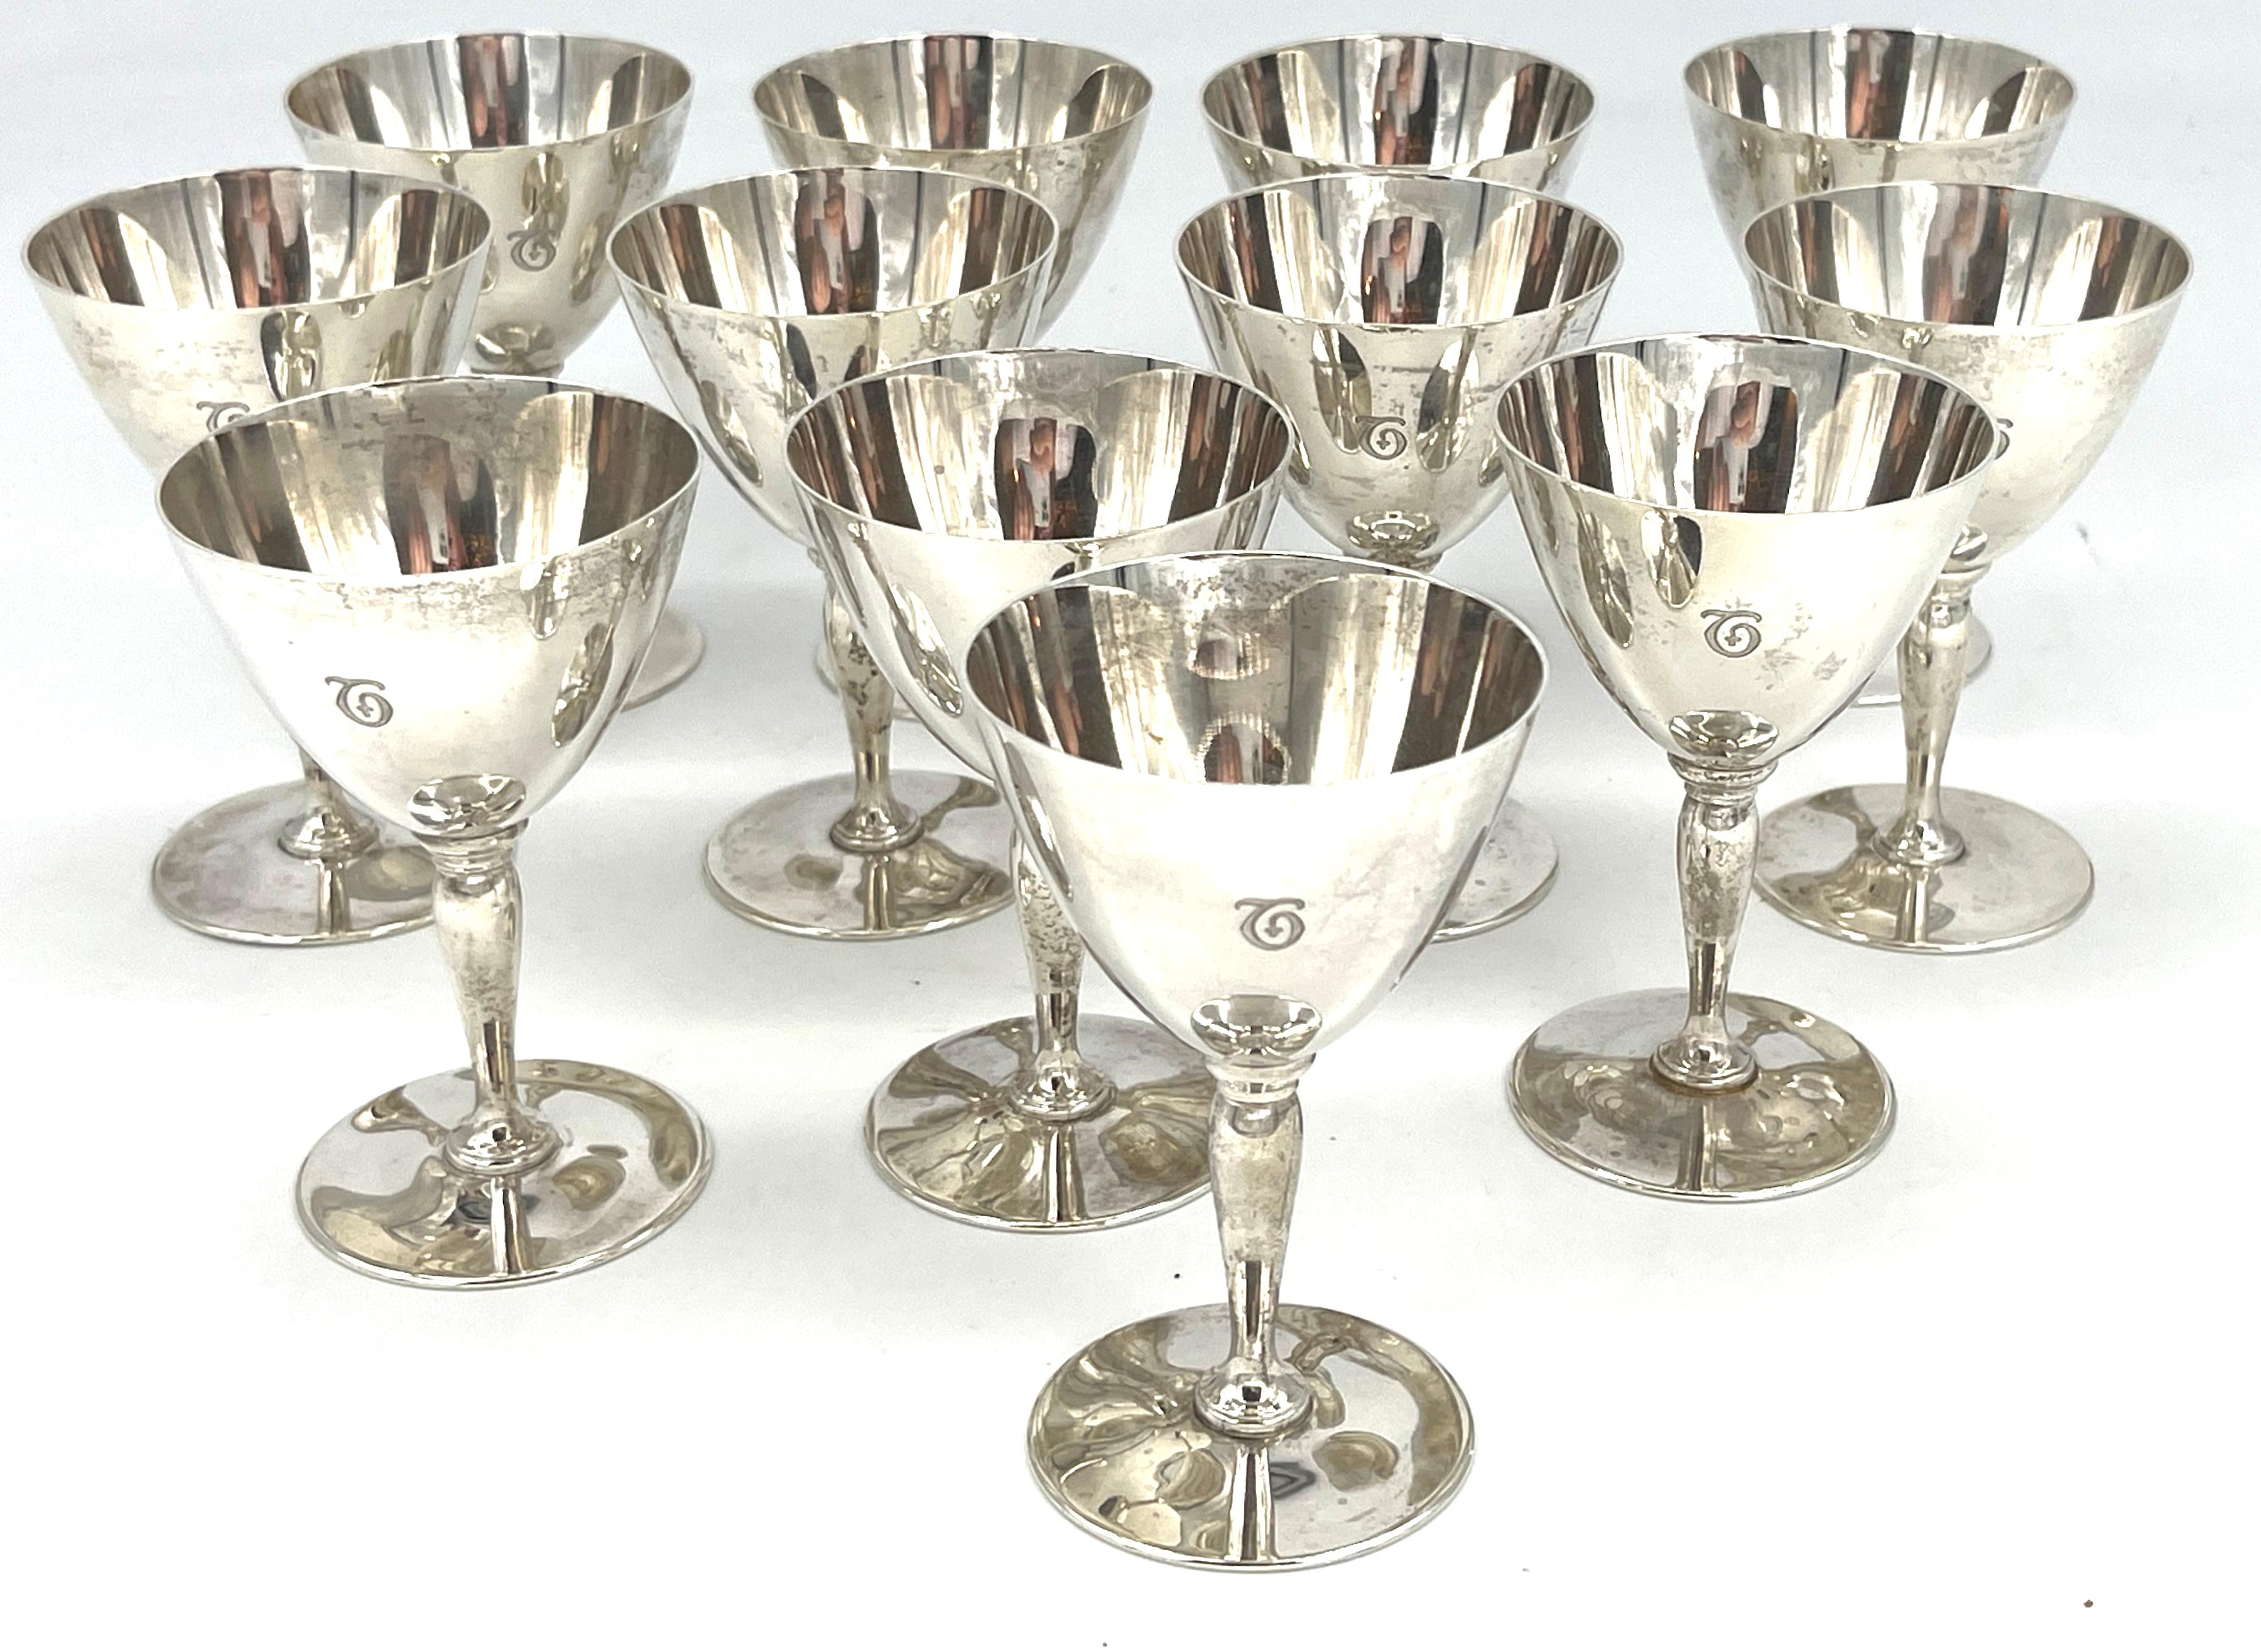 Set of 12 Tiffany Art Deco Sterling Goblets, 1907–1947
USA, Circa 1907–1947


A remarkable set of 12 Tiffany Art Deco Sterling Goblets was made between 1907 and 1947 in the USA. Each goblet stands at 4 inches in height with a diameter of 2.5 inches,